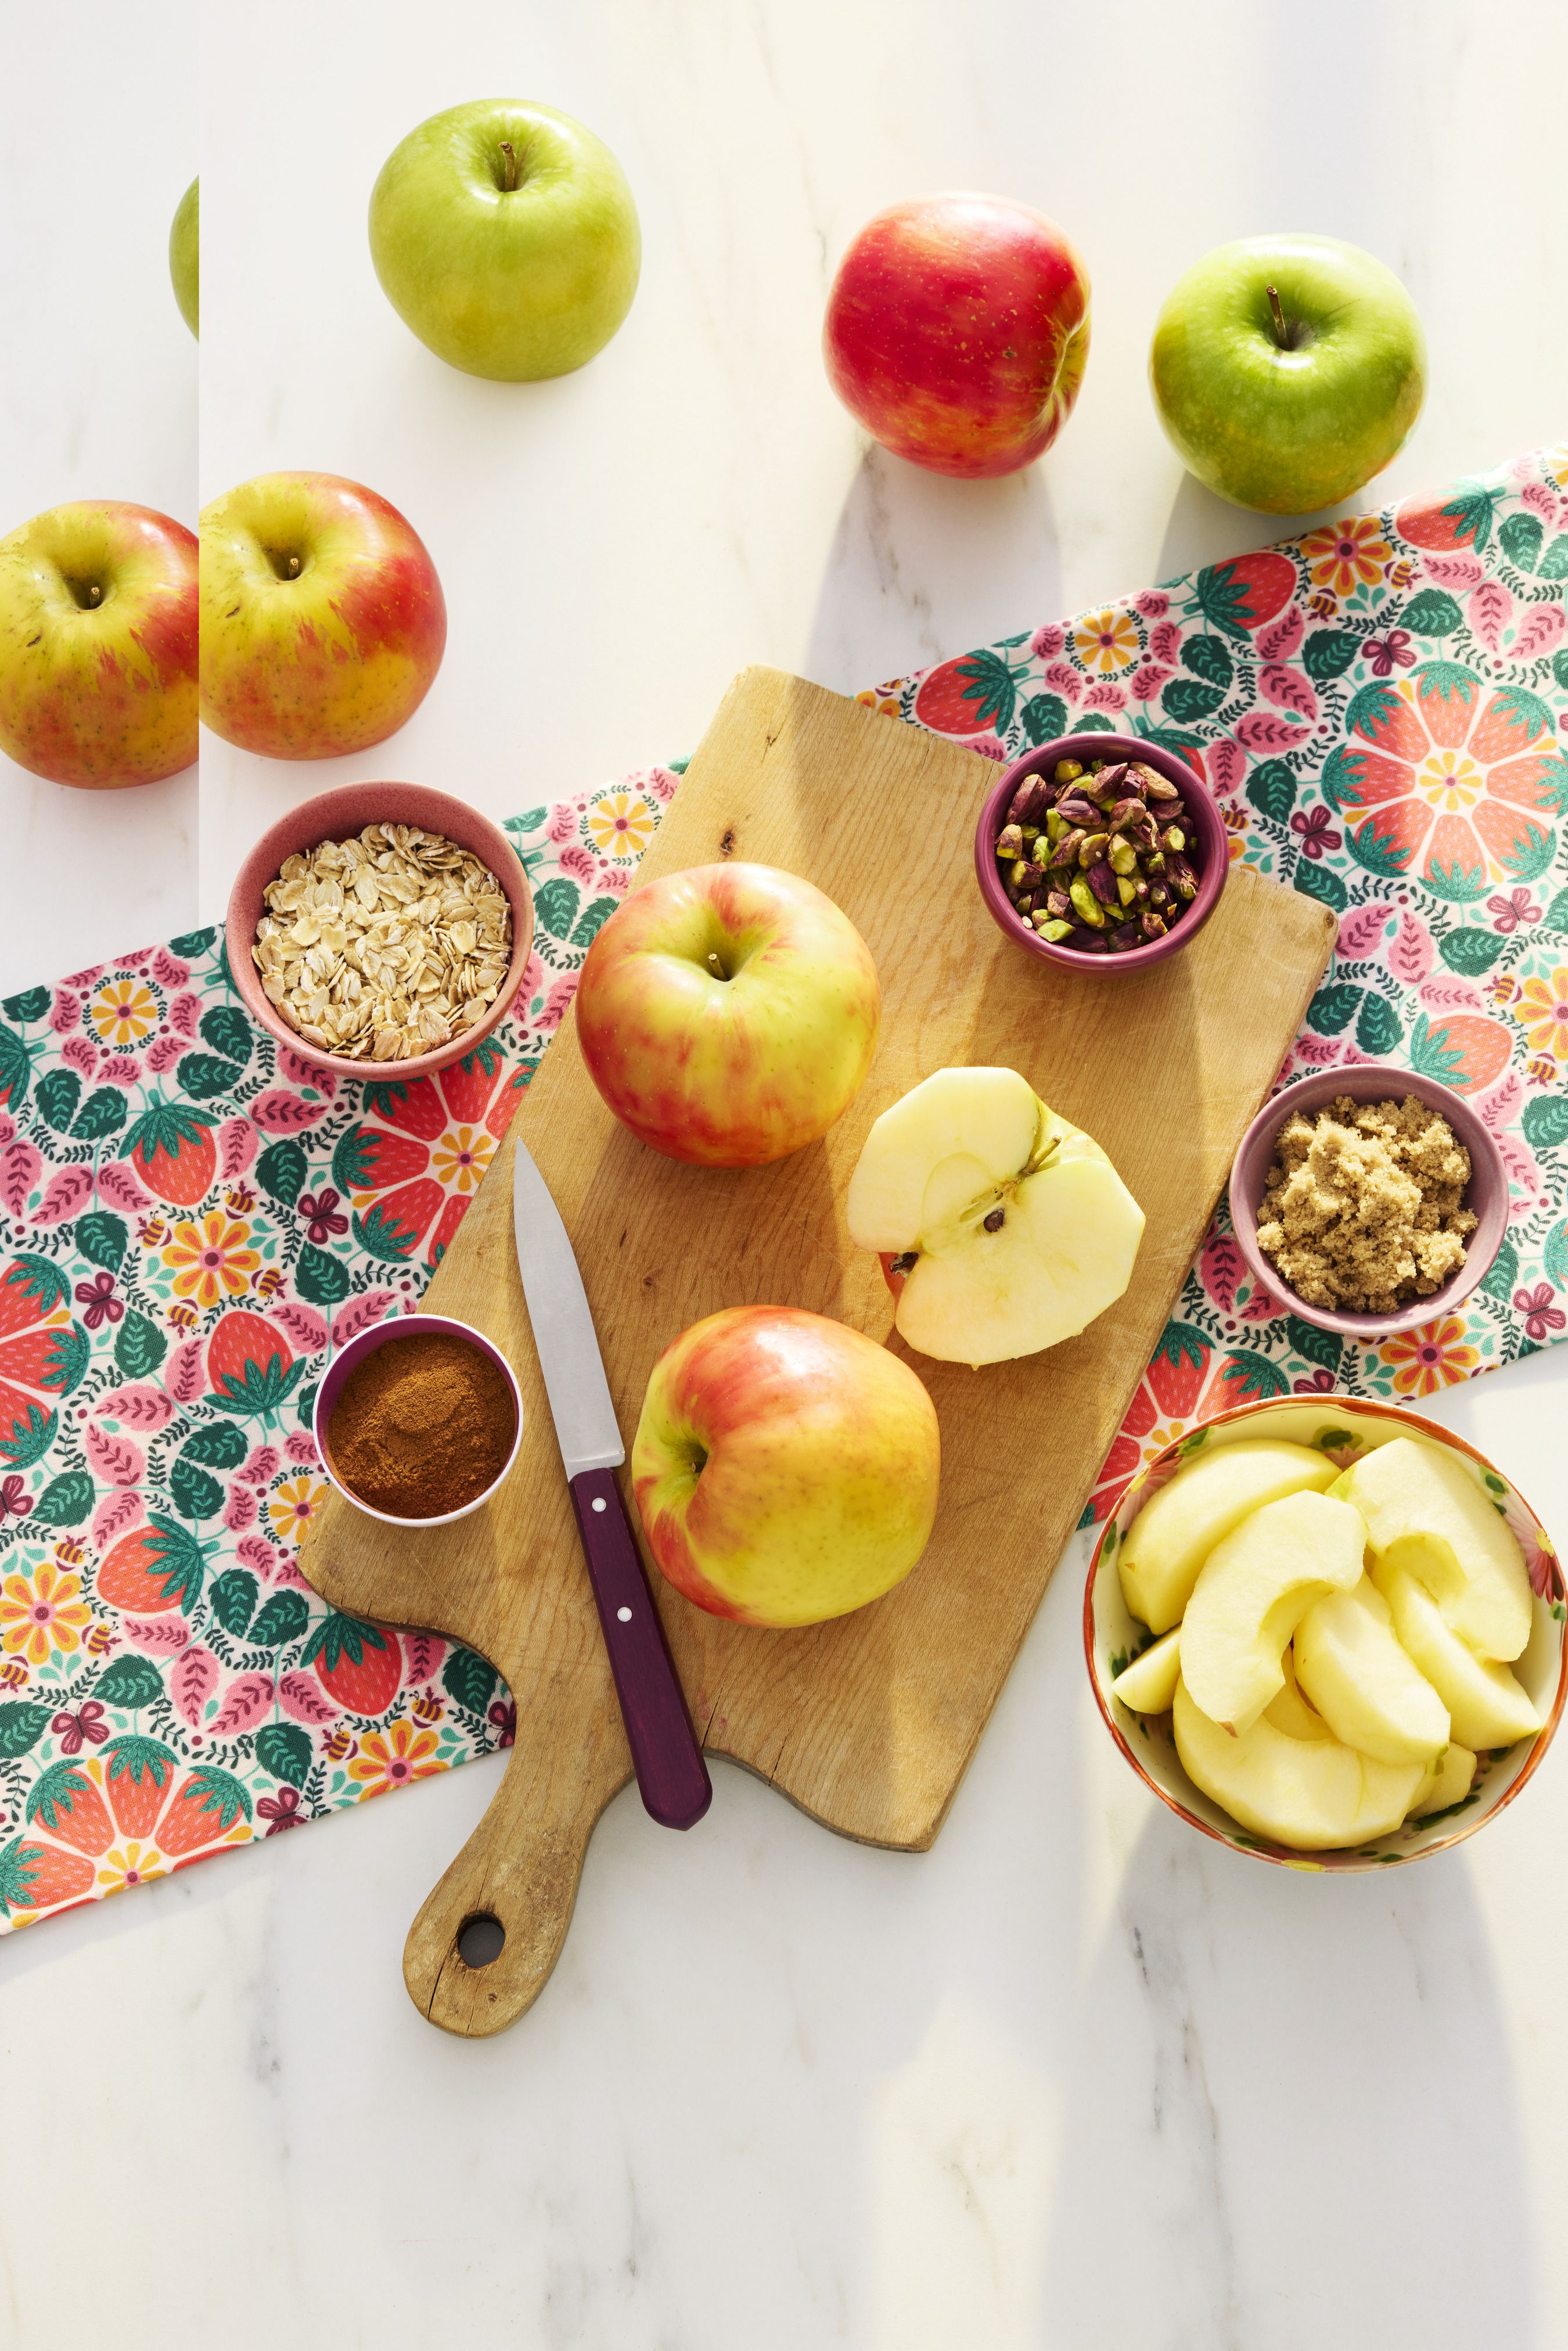 7 Easy Ways to Keep Apples From Browning - Evolving Table